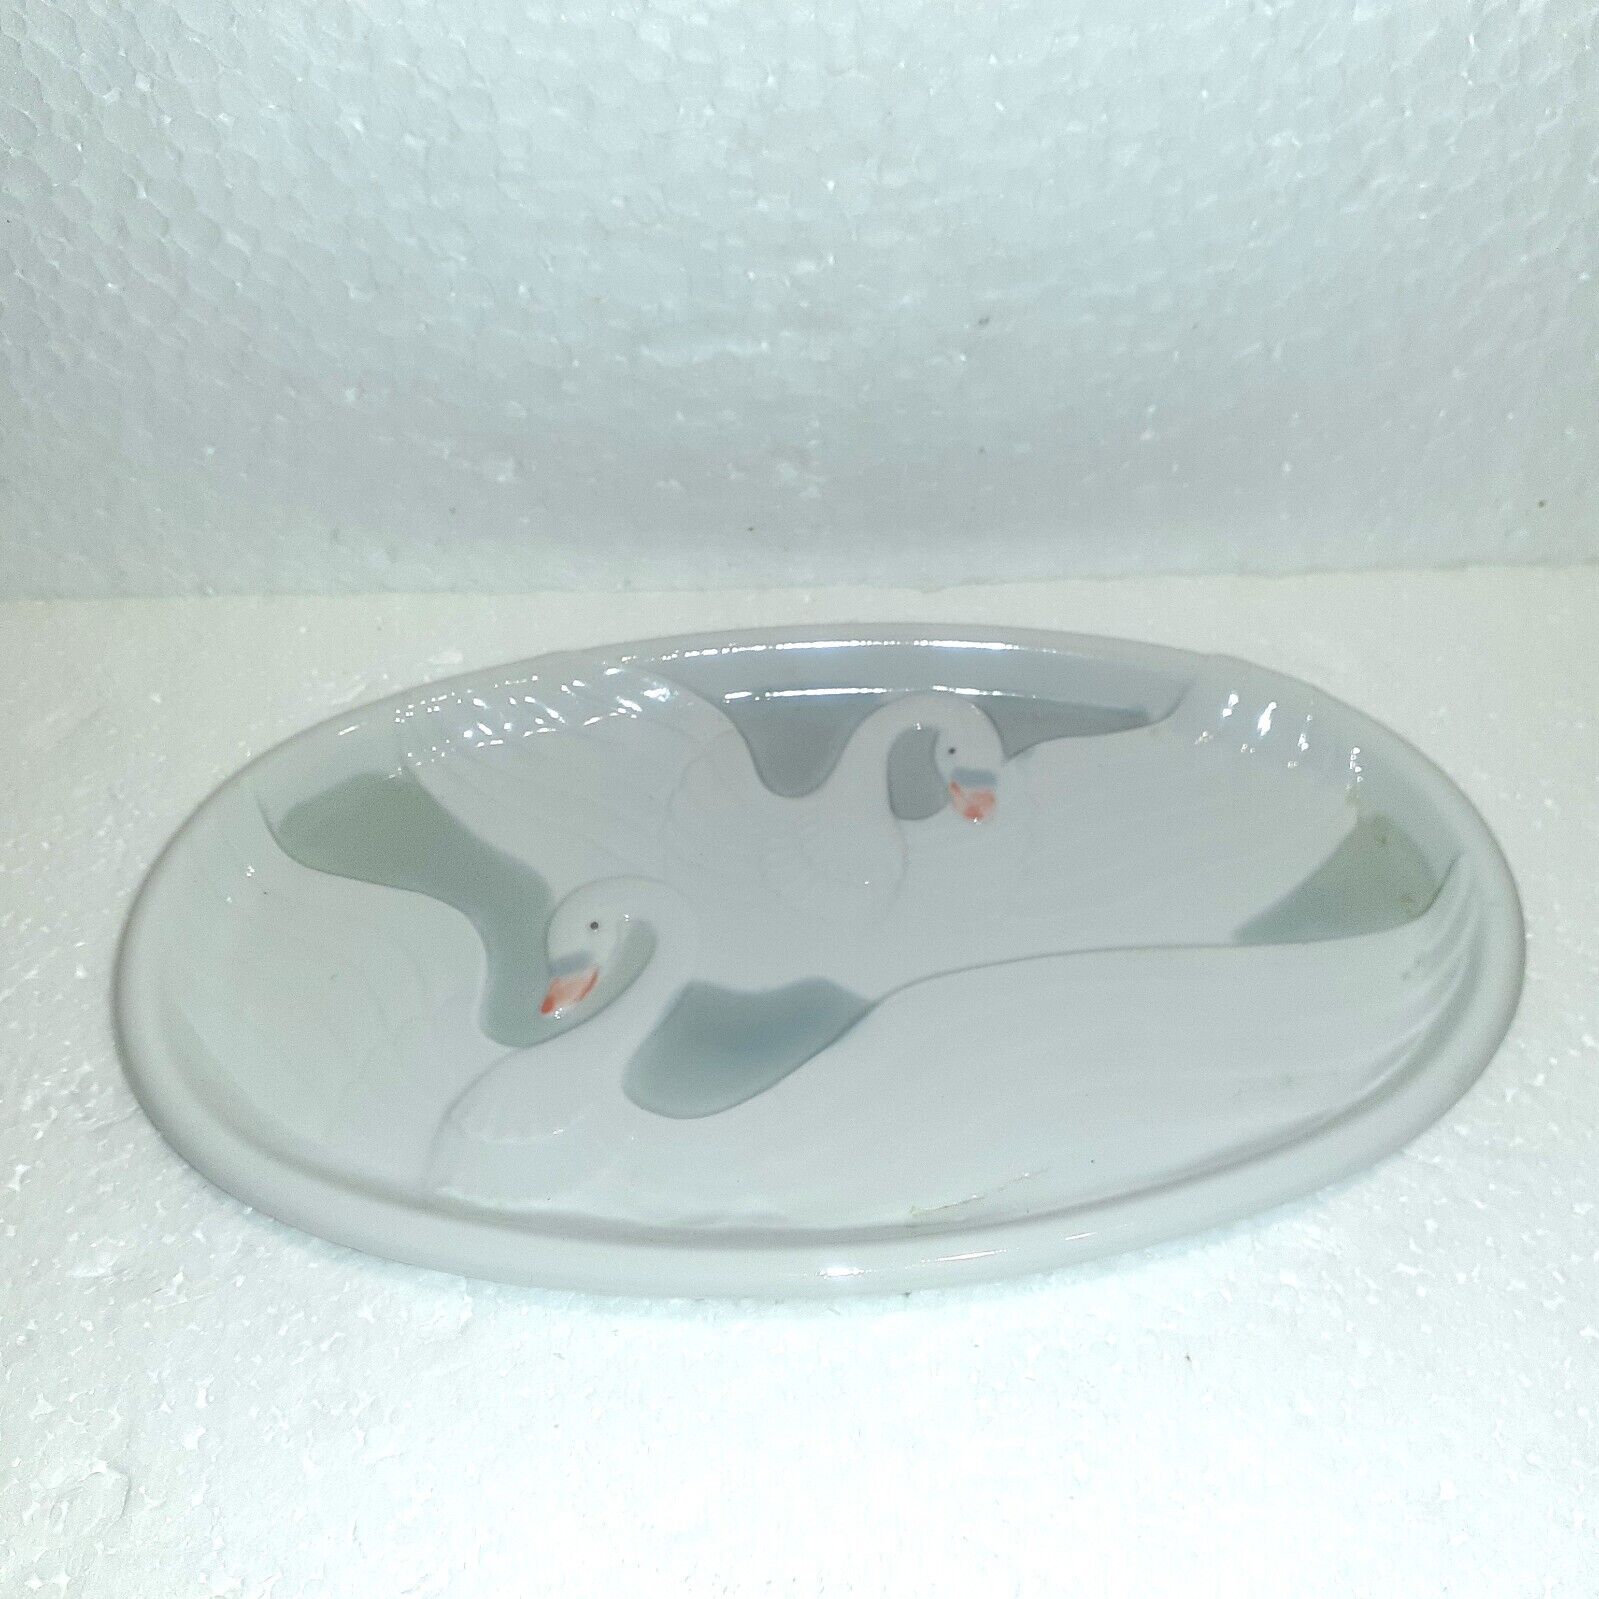 ~~ ~ REALLY Nice VINTAGE Oval SWAN TRAY or VANITY DISH Excellent Condition ~ ~~